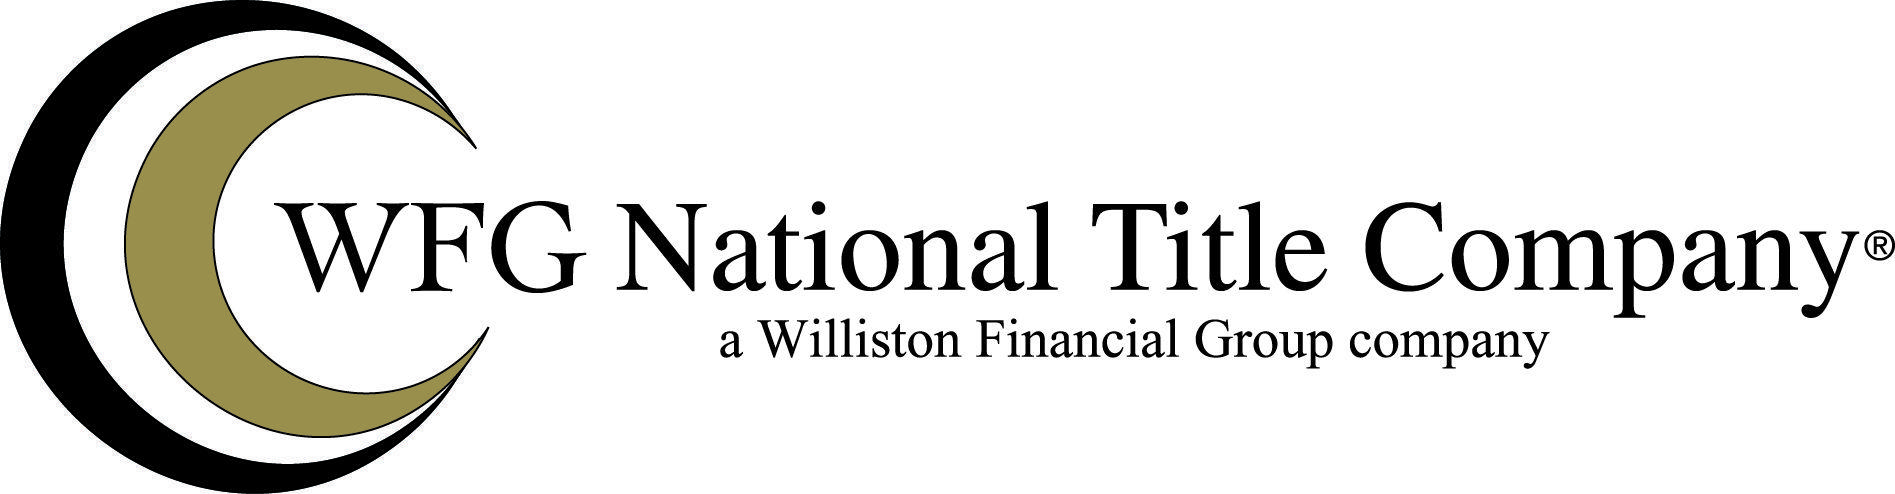 WFG Logo - National Title Insurance Underwriters Wfg Title Company